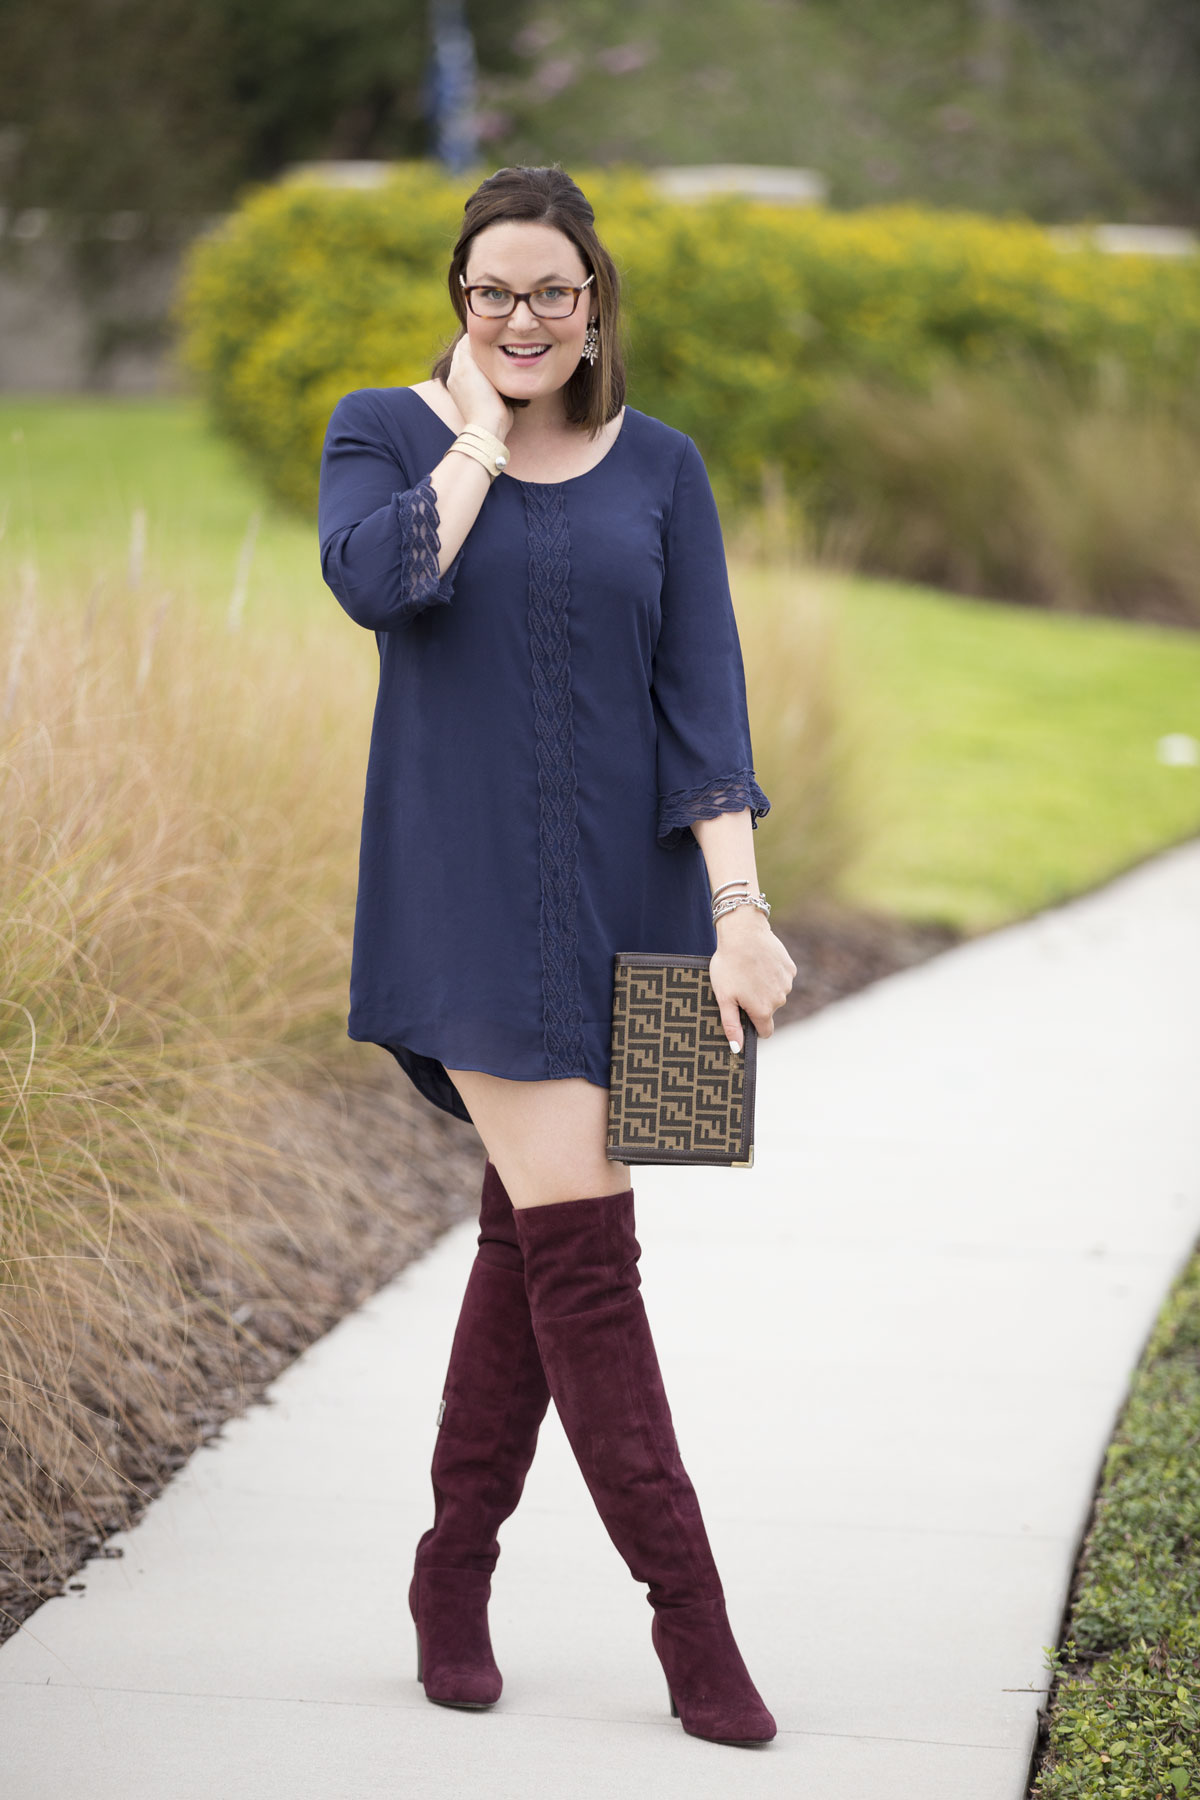 Florida lifestyle blogger, MikaelaJ, shares the perfect outfit to kick of Fall! Knee high boots and a lace trimmed dress both in gorgeous jewel tones!